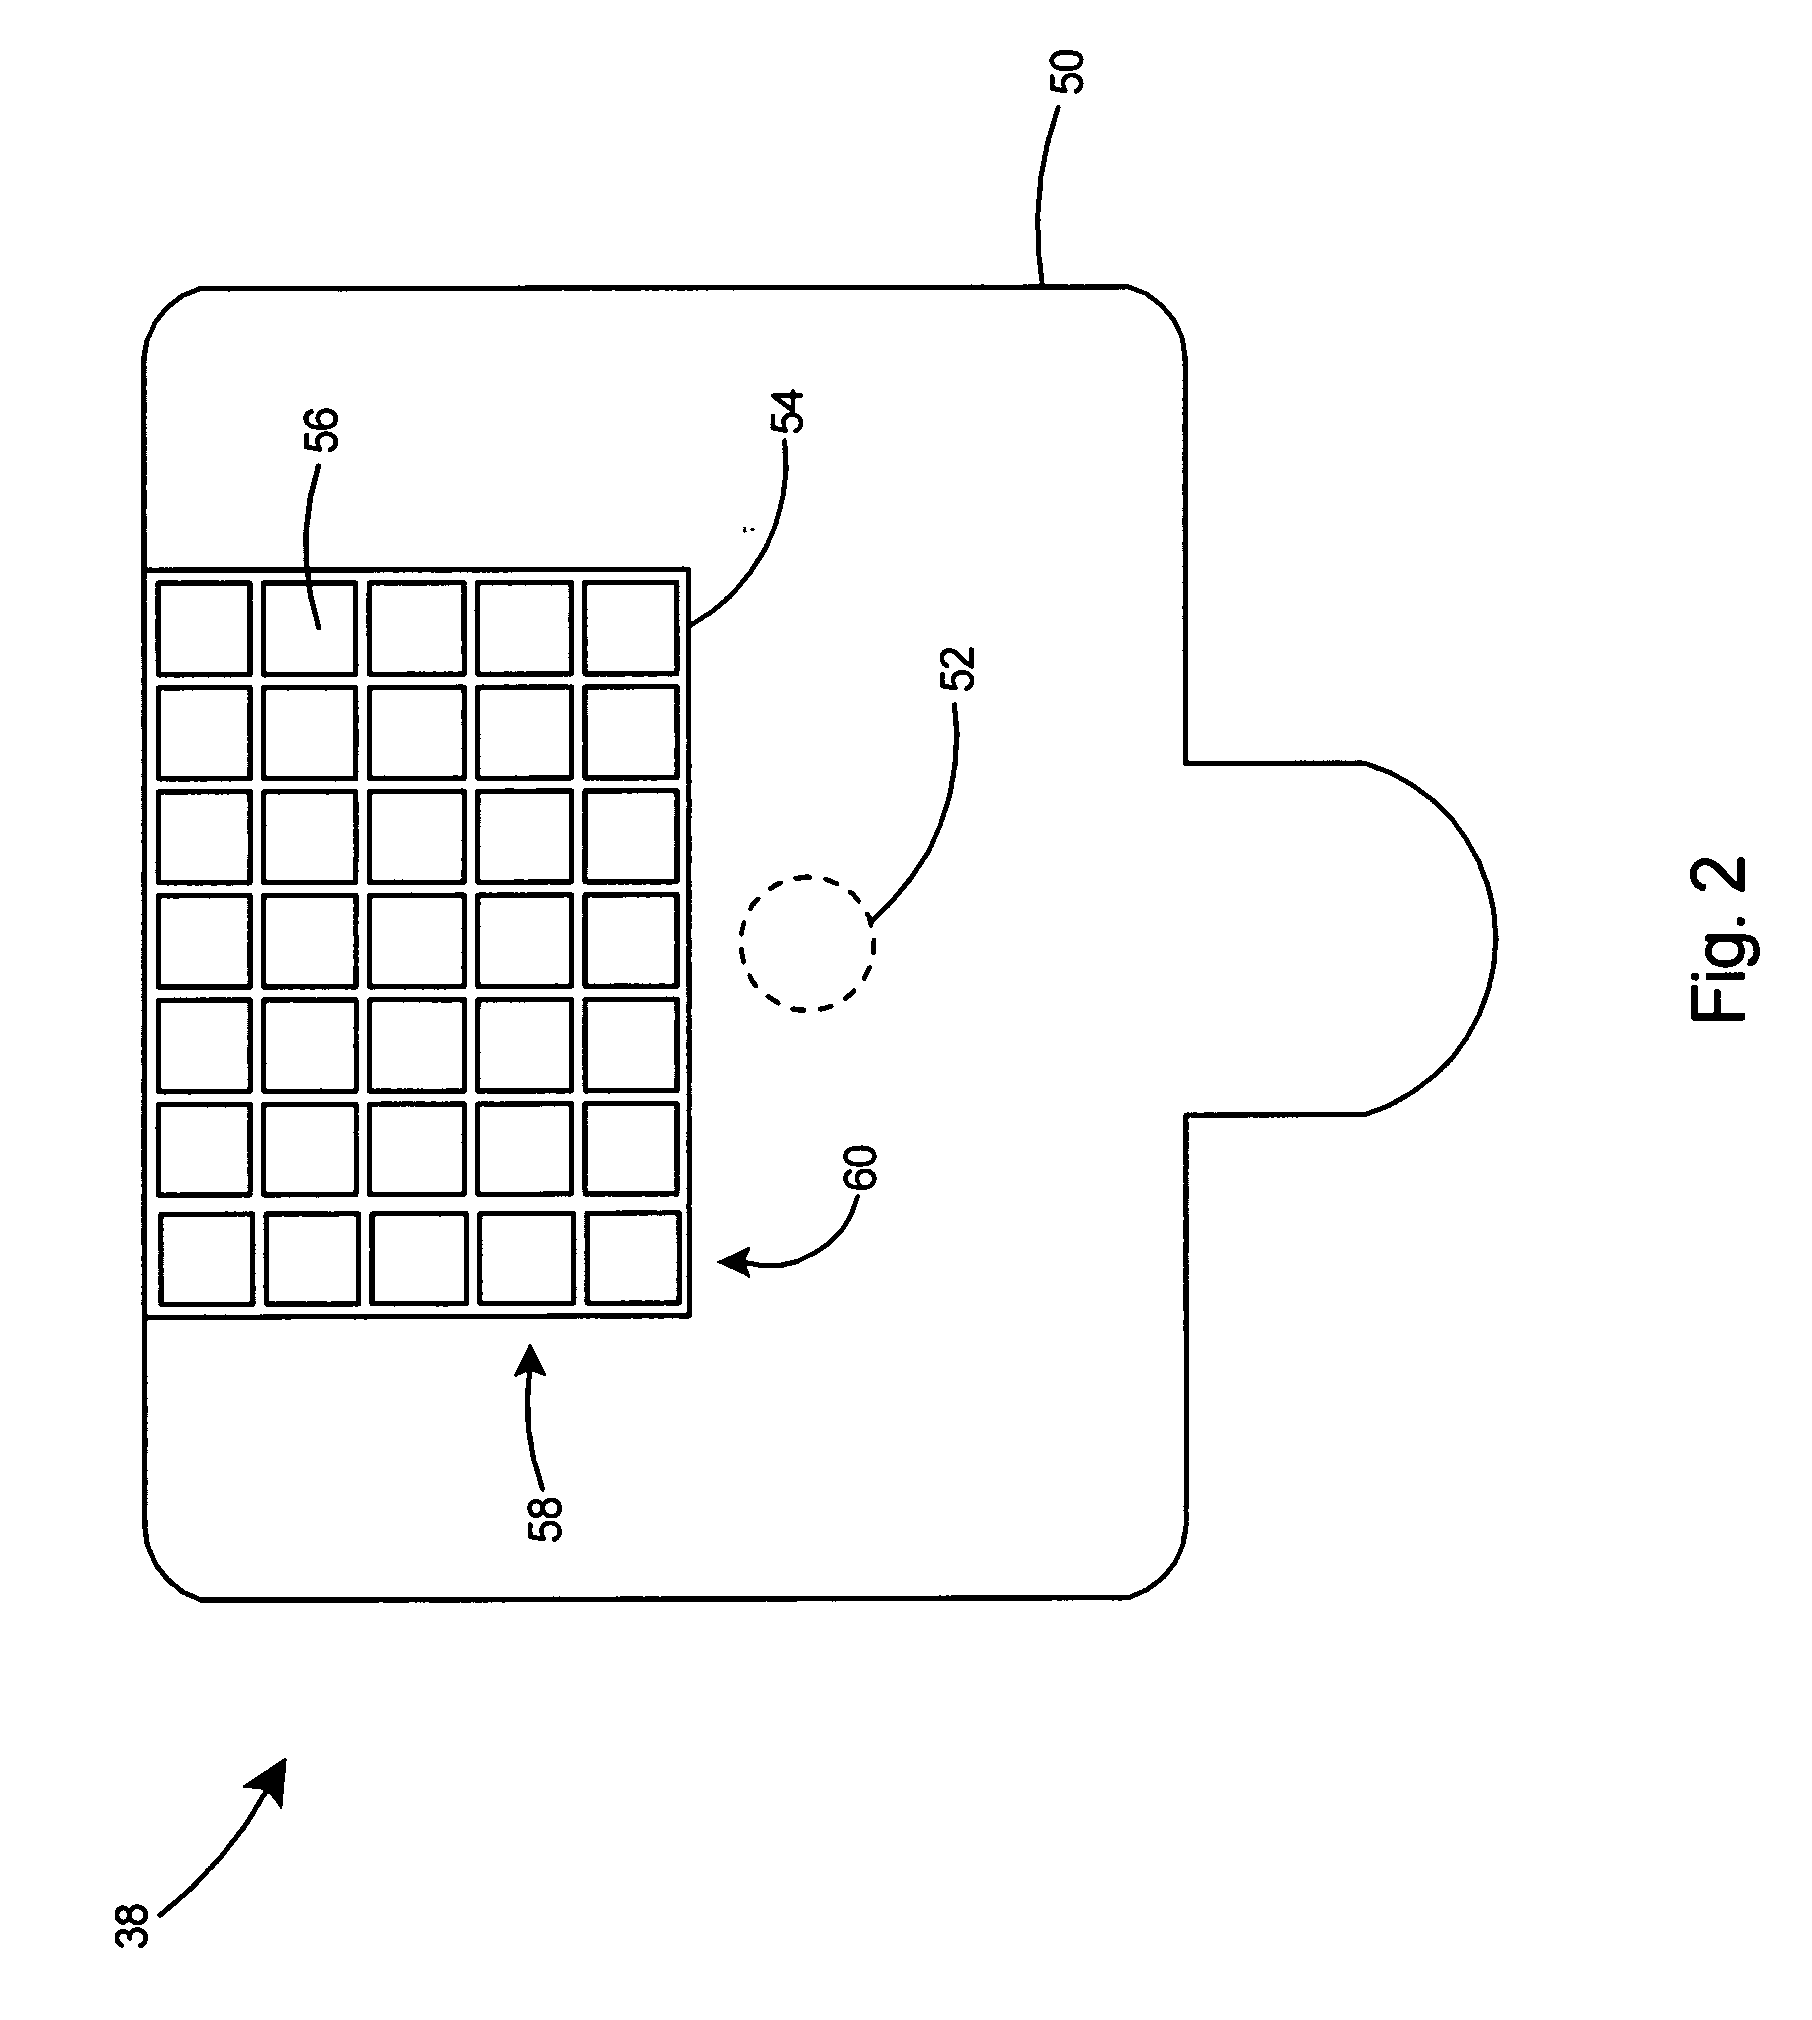 Gamma guided stereotactic localization system